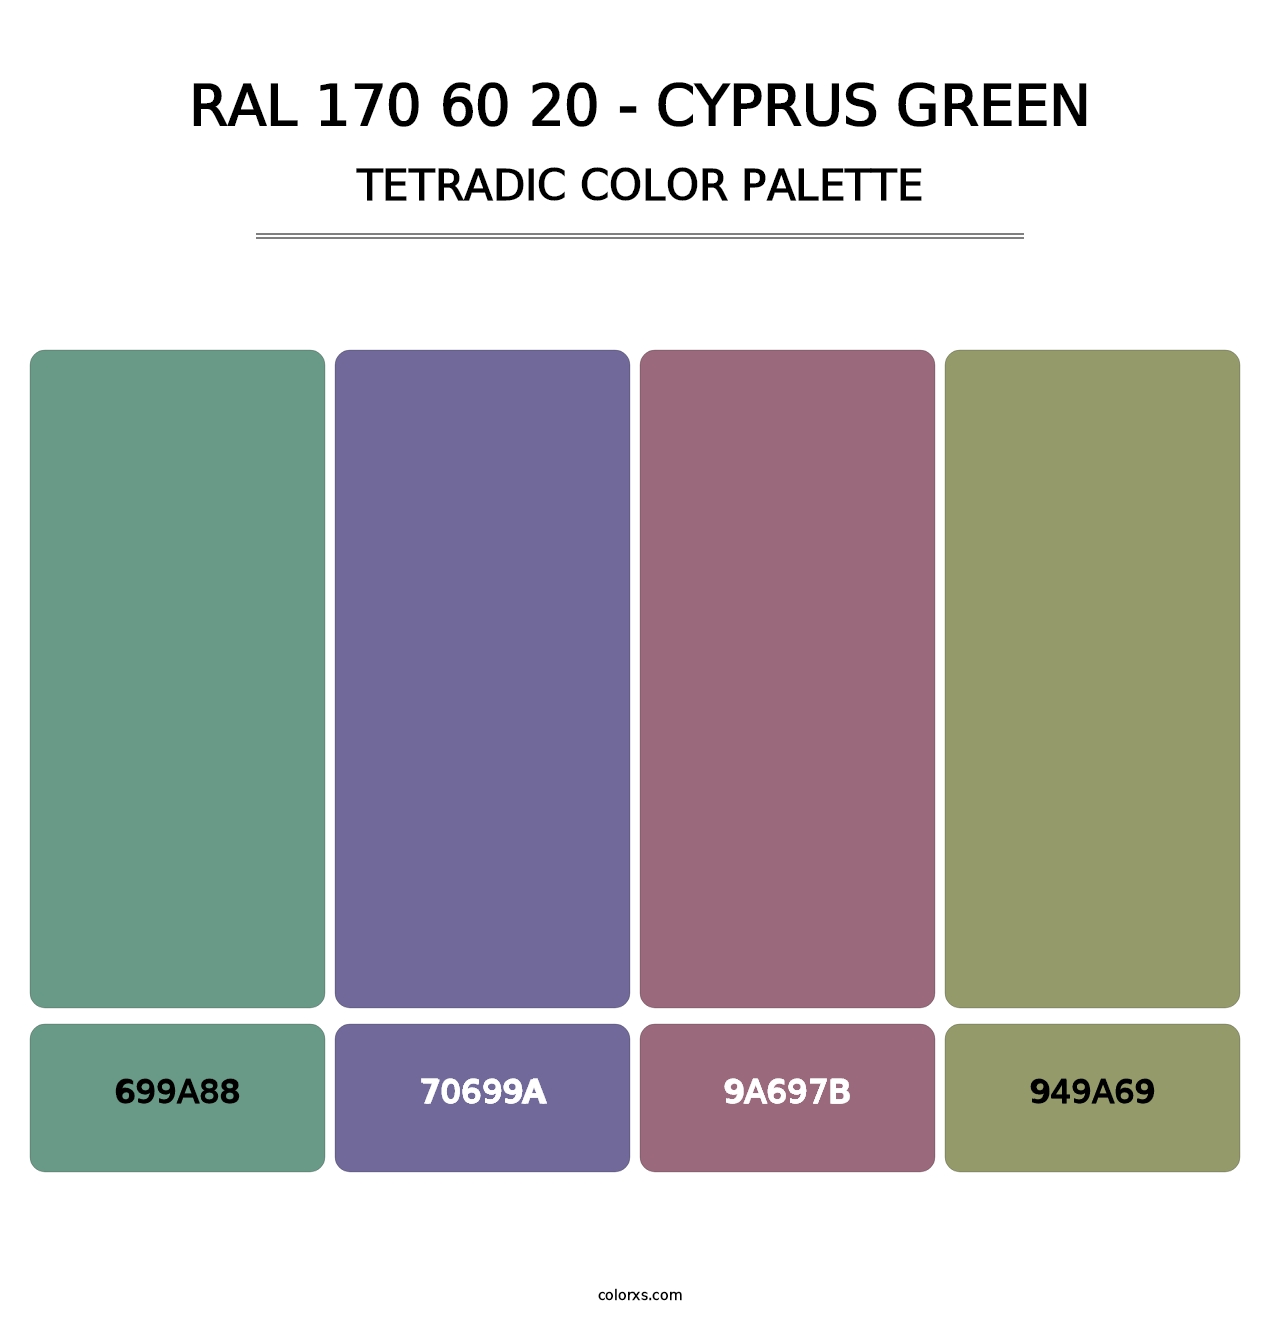 RAL 170 60 20 - Cyprus Green - Tetradic Color Palette